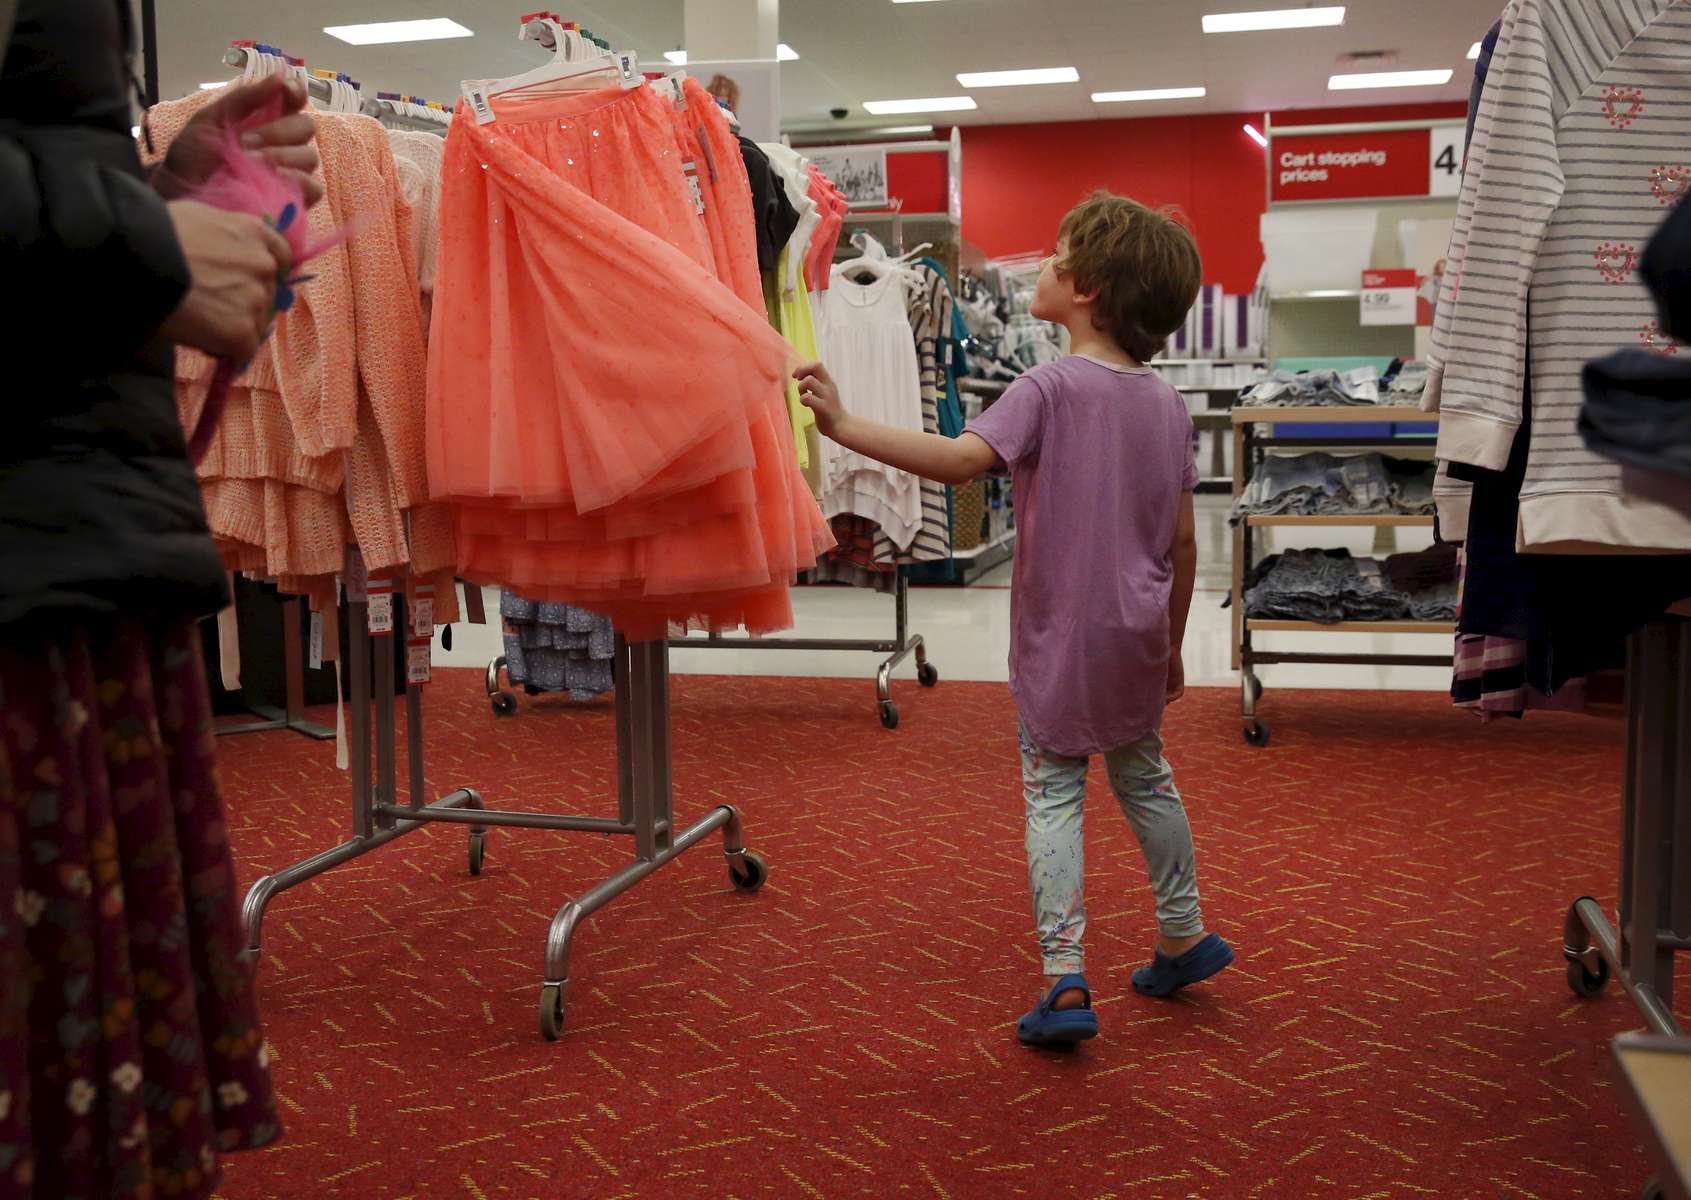 Olivia Kaplan, 4, drifts through the girls' clothing section during a trip to Target to find formal clothes for James Feb. 17, 2017 in Berkeley, Calif. Olivia, James' sibling, had been describing herself as trans for much of the past year since her brother came out as a transgender boy. Sara and Ben decided to brush it off to see if it was just something she was saying to copy her sibling. But it became apparent over time that it was very real to Olivia. She has always been a feminine child and she finally shouted at her parents that she was a girl at the beginning of the year. They cautiously allowed her to begin the transition. As of June, 2017, Olivia is still happily presenting as a girl. Sara and Ben plan on doing what they have for James: provide a supportive space for their children to be themselves whoever they turn out to be later in life.